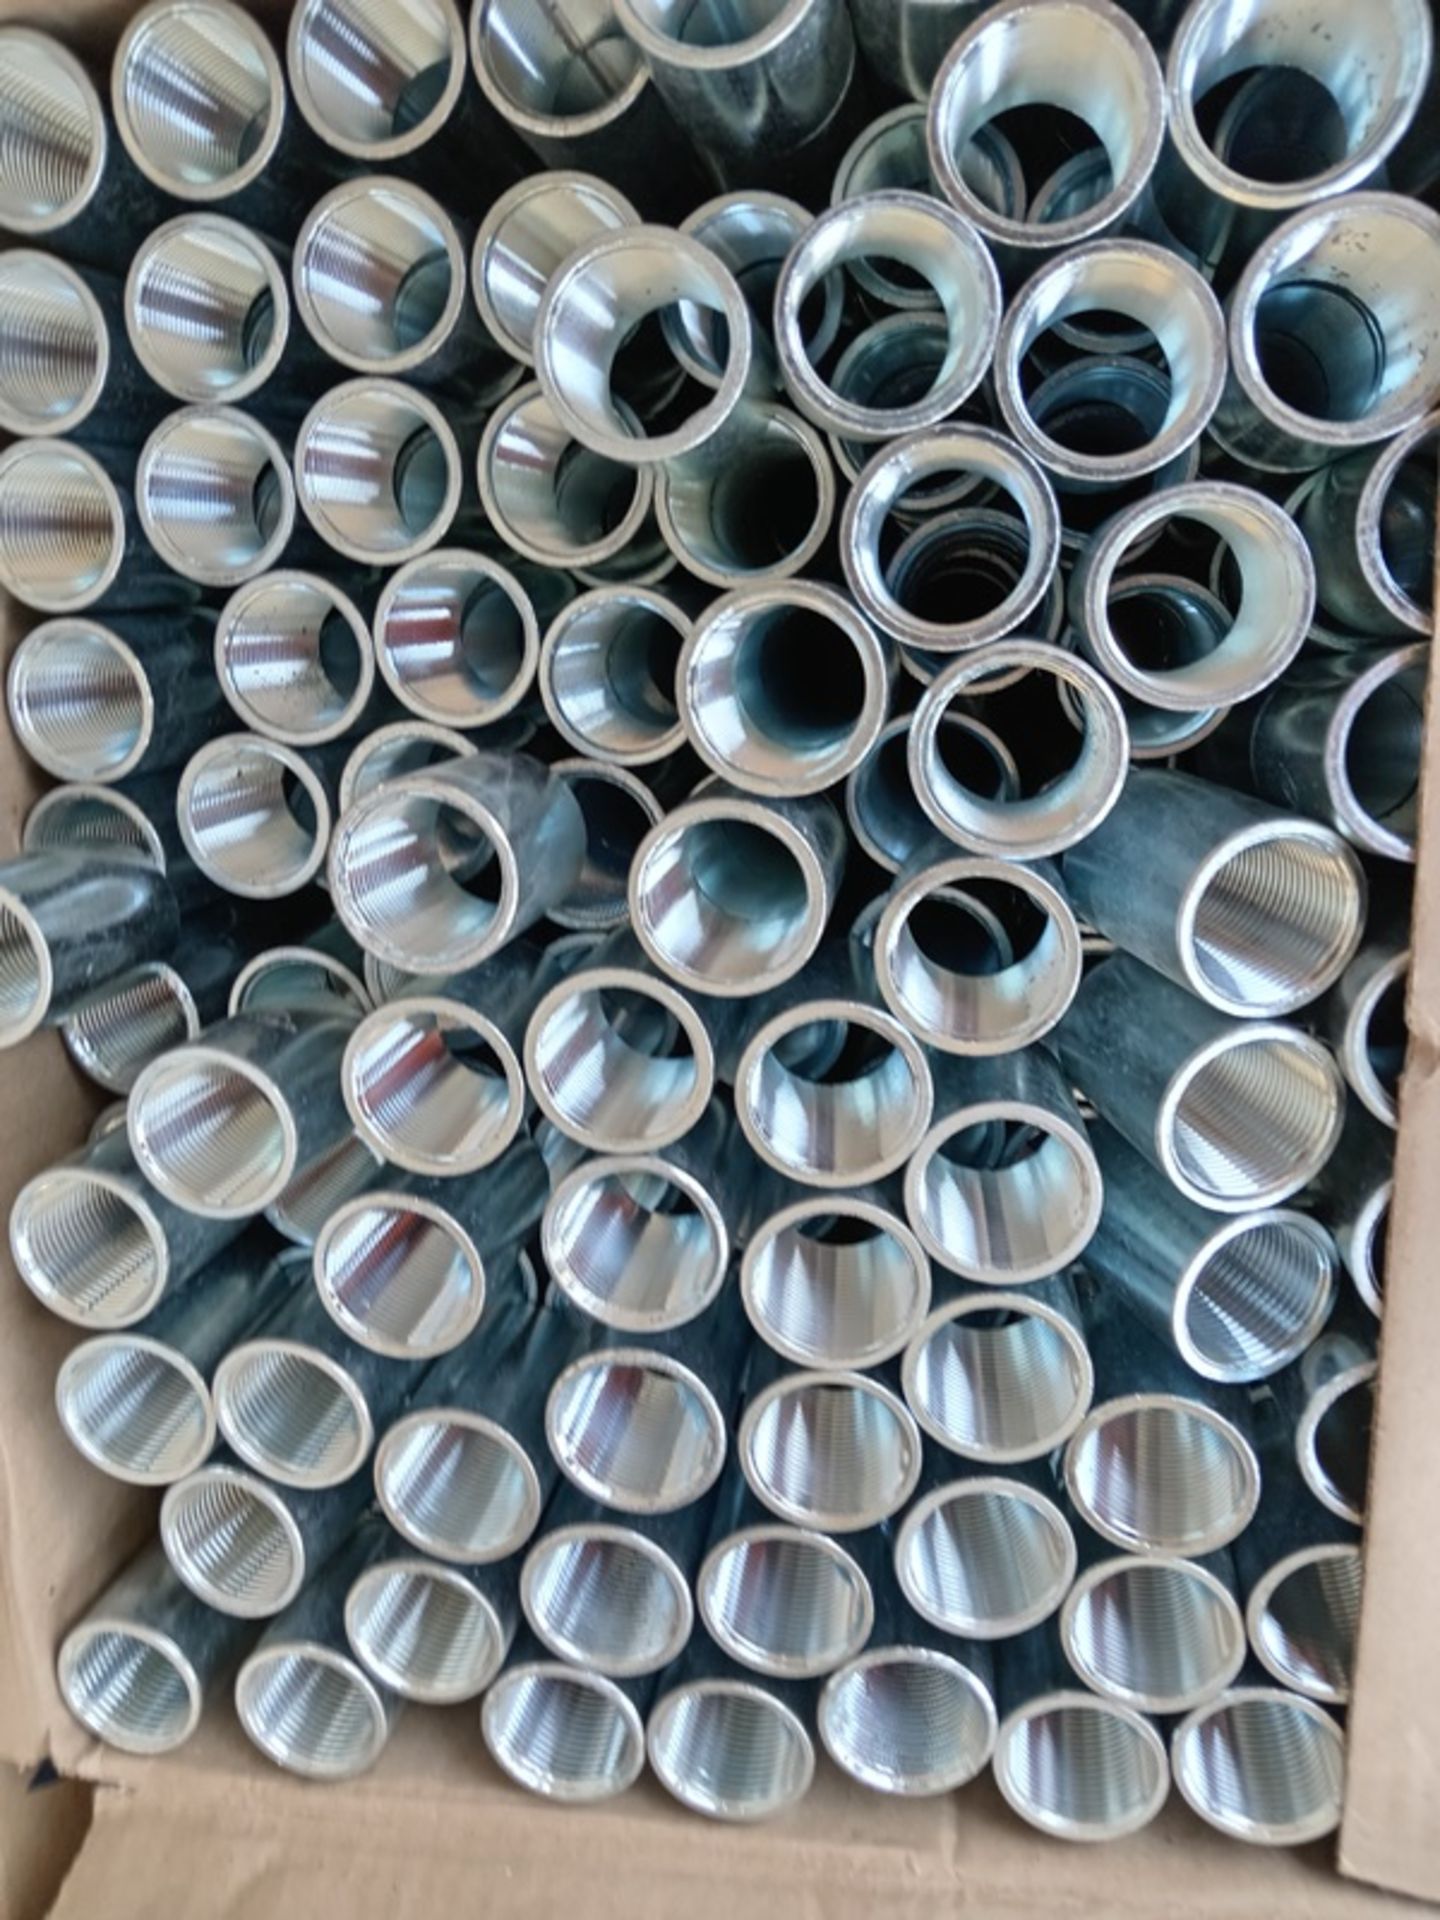 LOT OF (1,684) PIECES OF GALVANIZED STEEL UNION COUPLINGS - Image 7 of 7